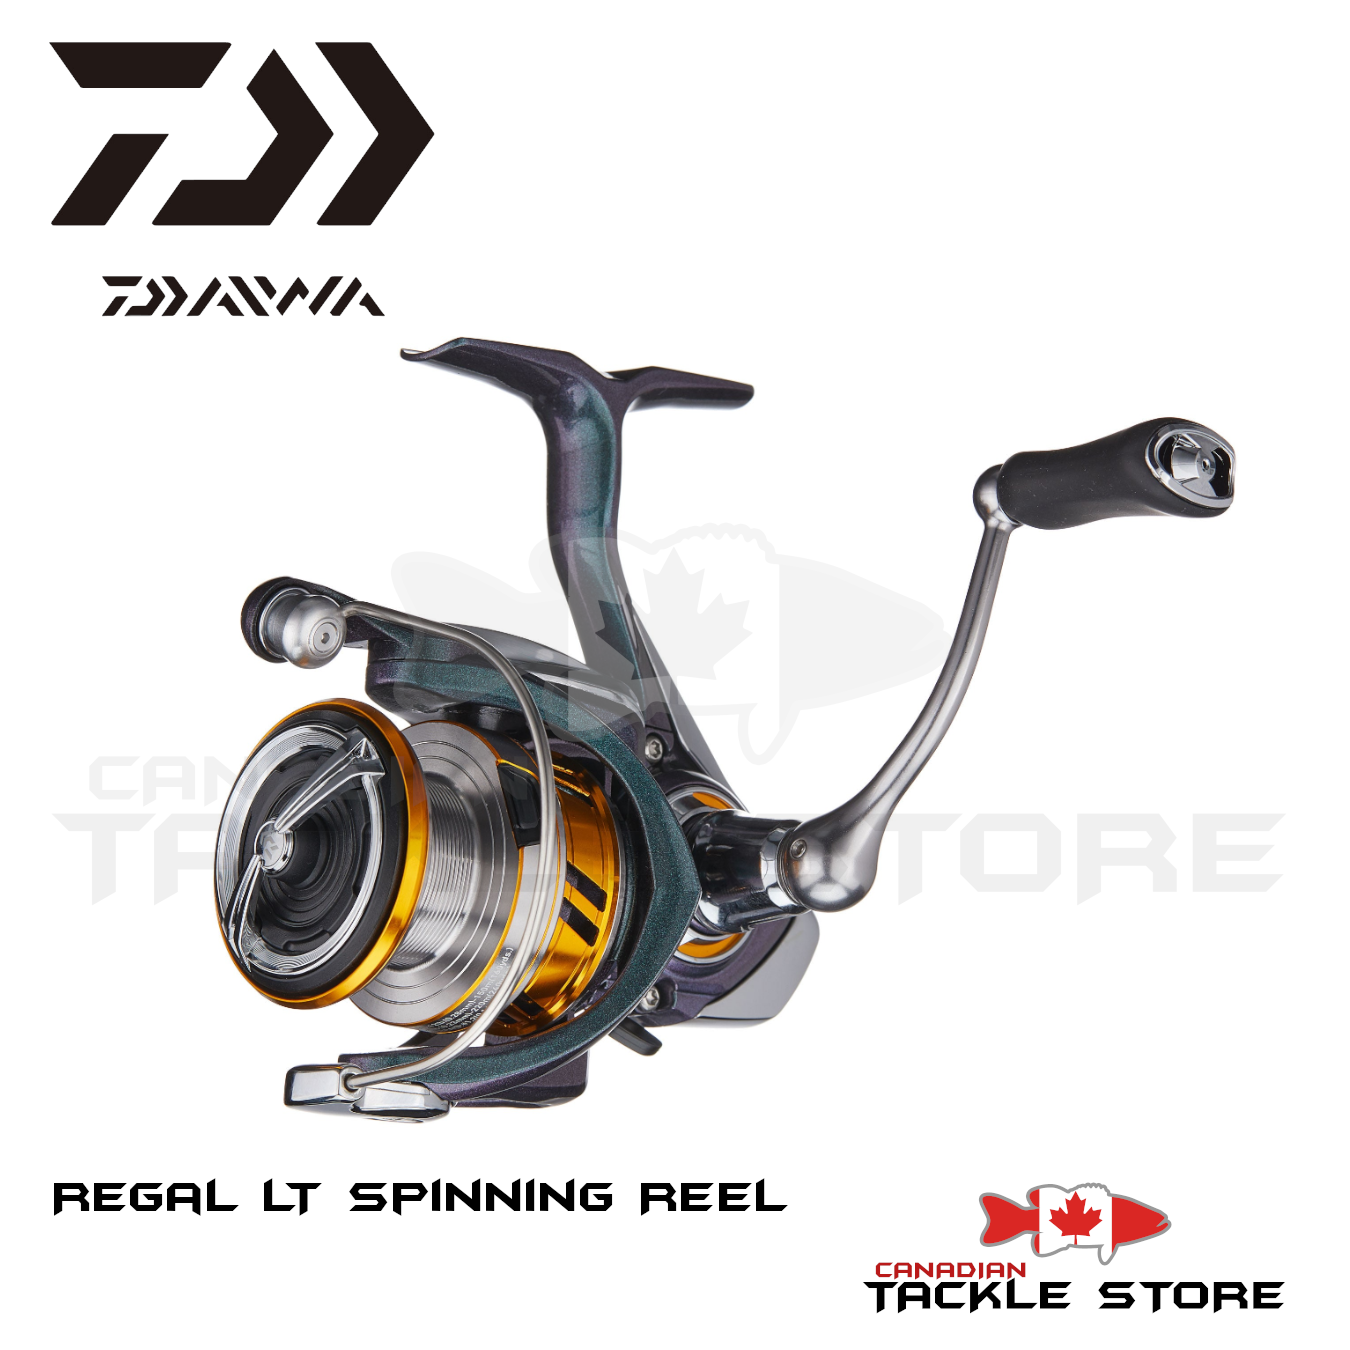 DAIWA D TURBO SPINCAST COMBO – Canadian Tackle Store